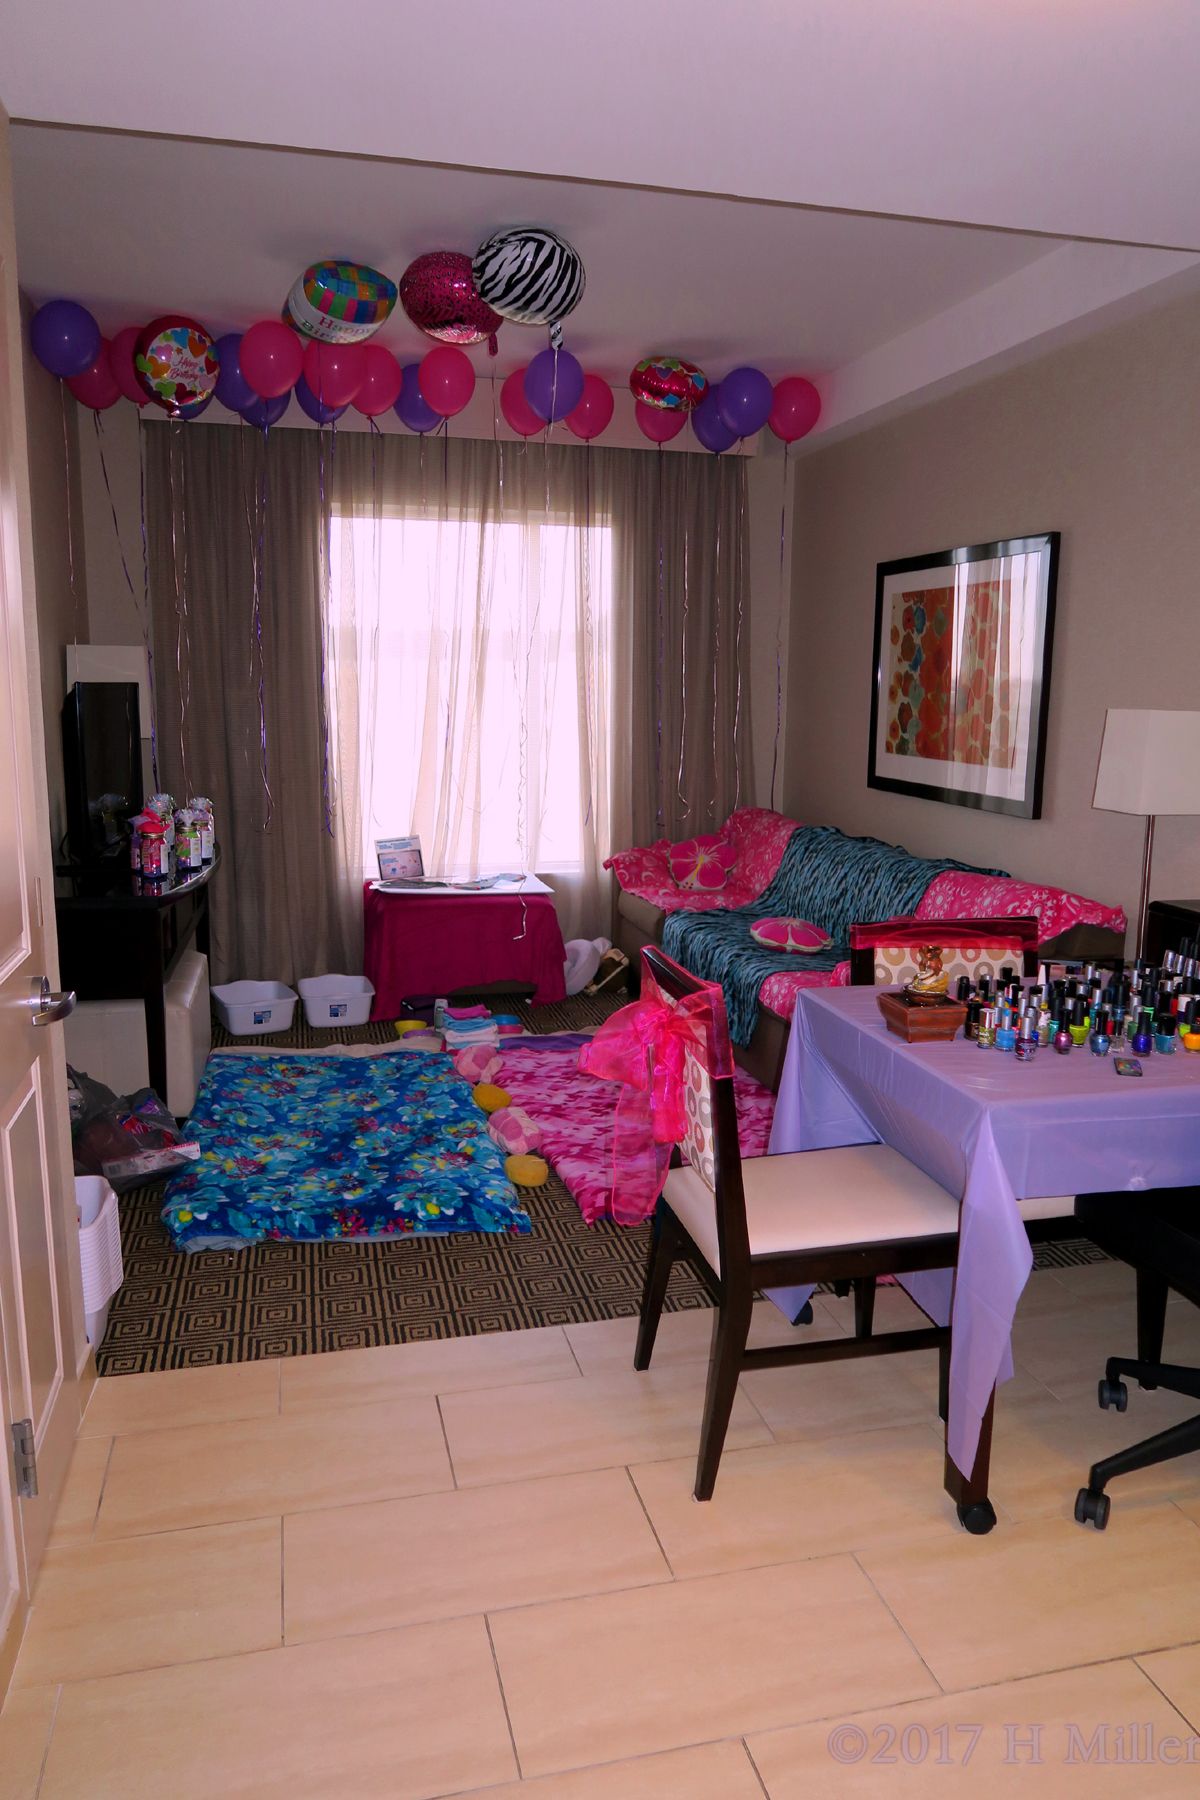 Birthday Ballons With Mani And Facial Arrangement, Perfect For Cynaya's Kids Spa Party. 